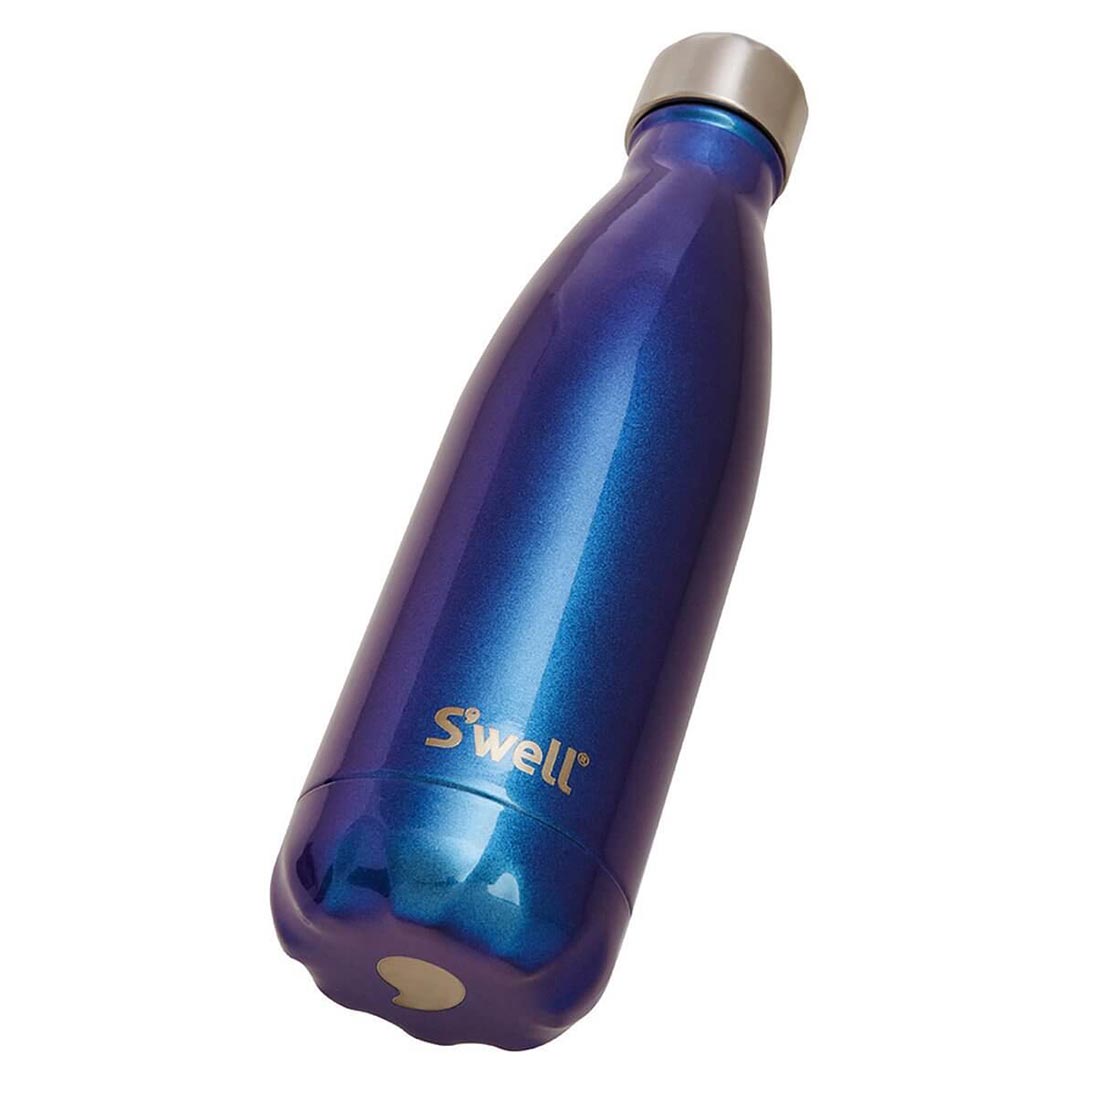 9 Reusable Water Bottles for Your Next Yoga Class